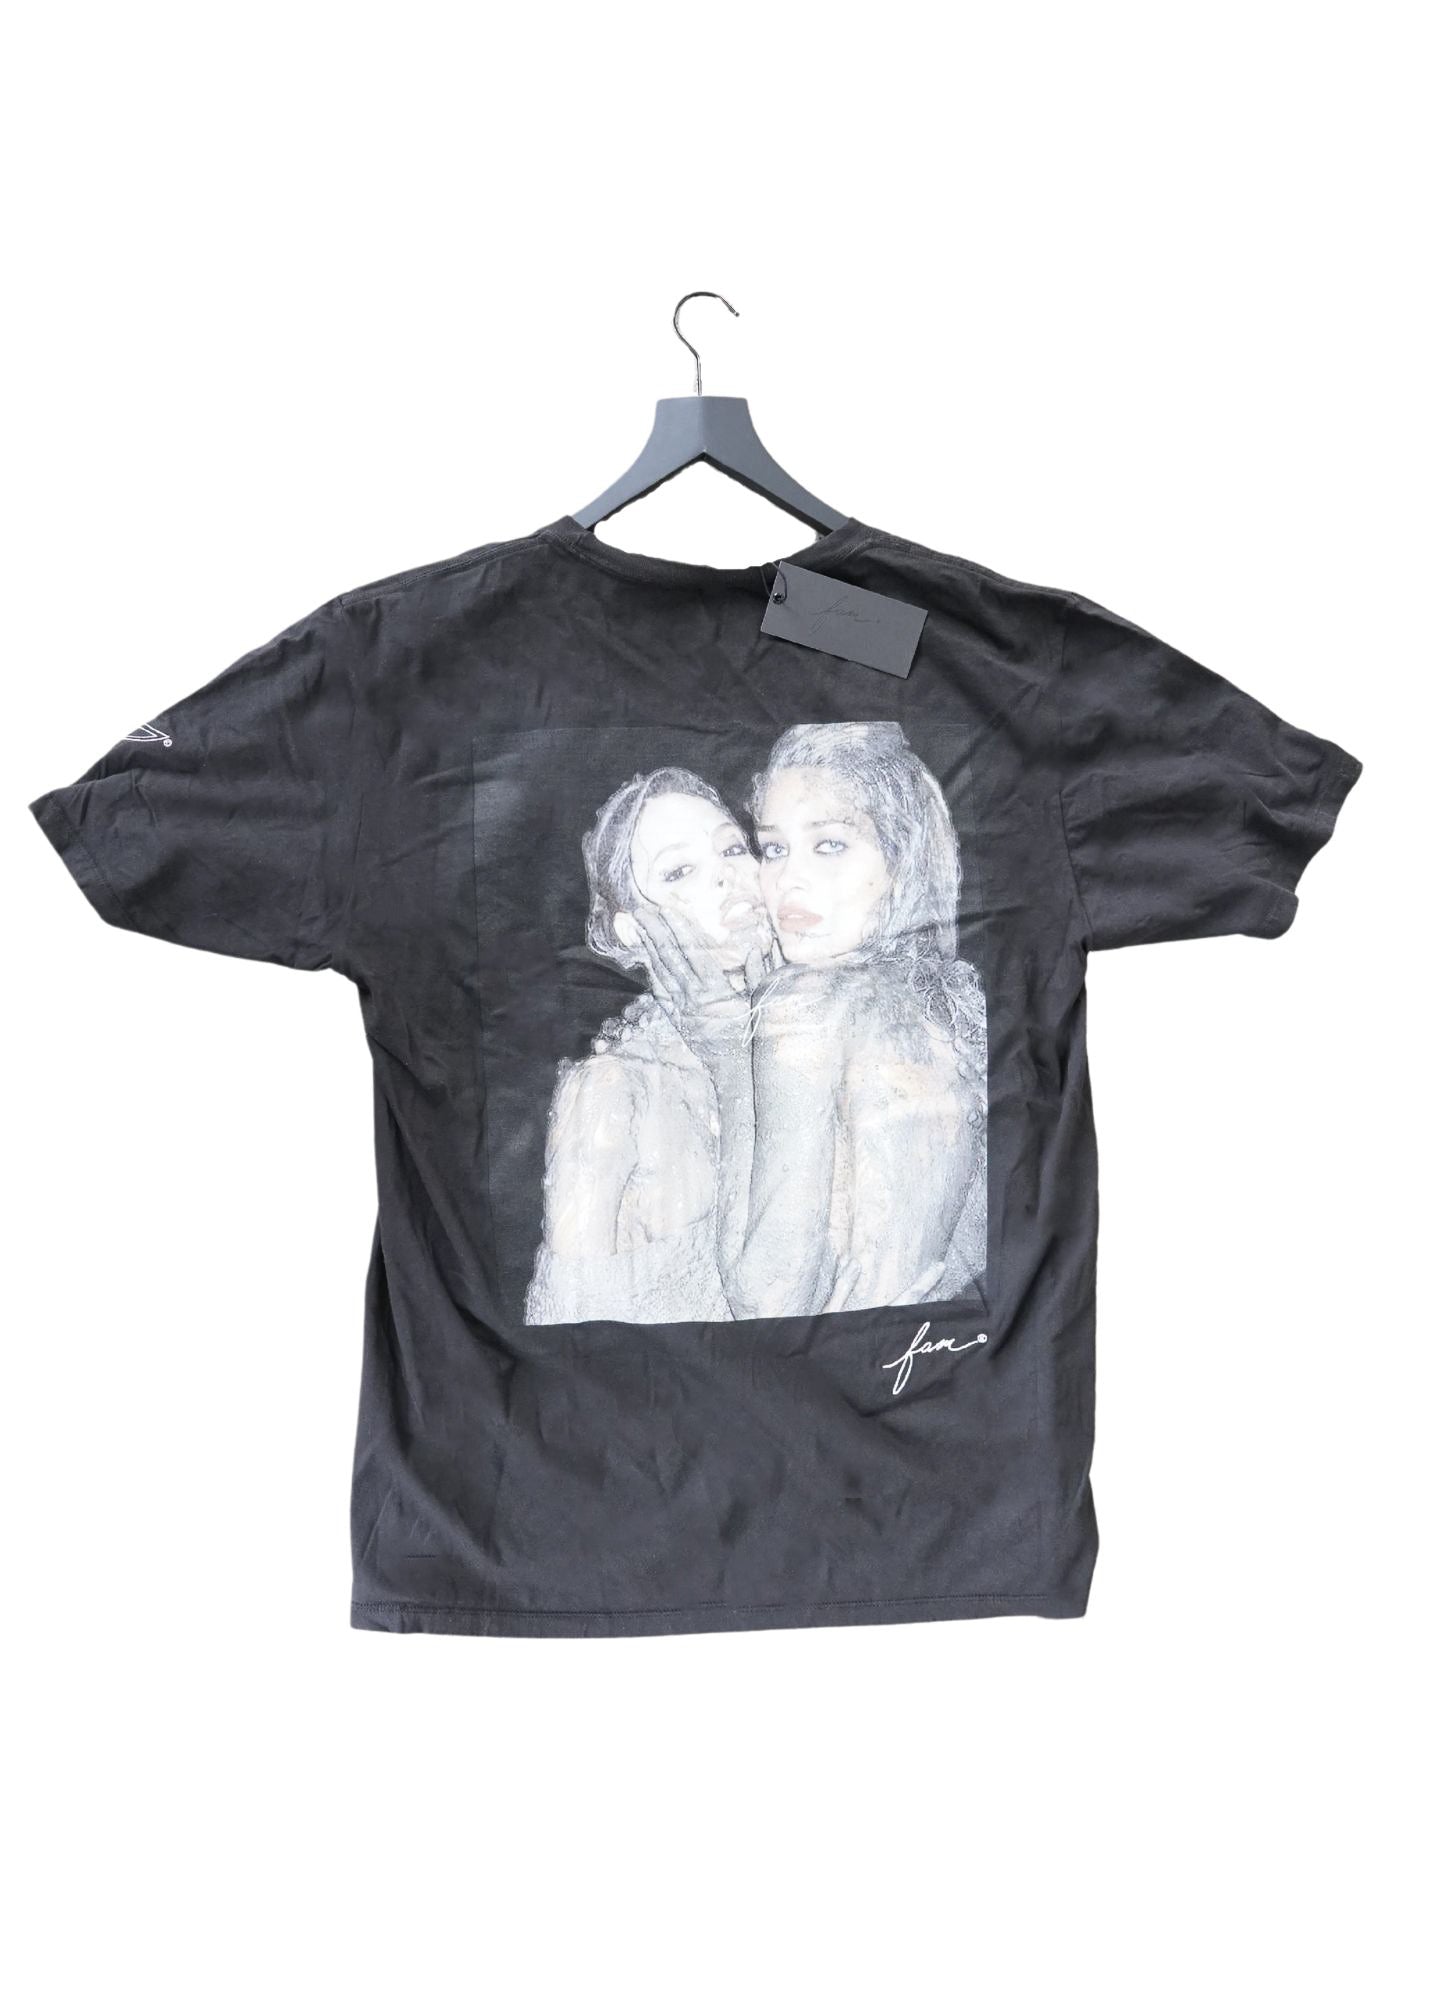 Fam - Out The Mud - Embroidered Graphic Tee